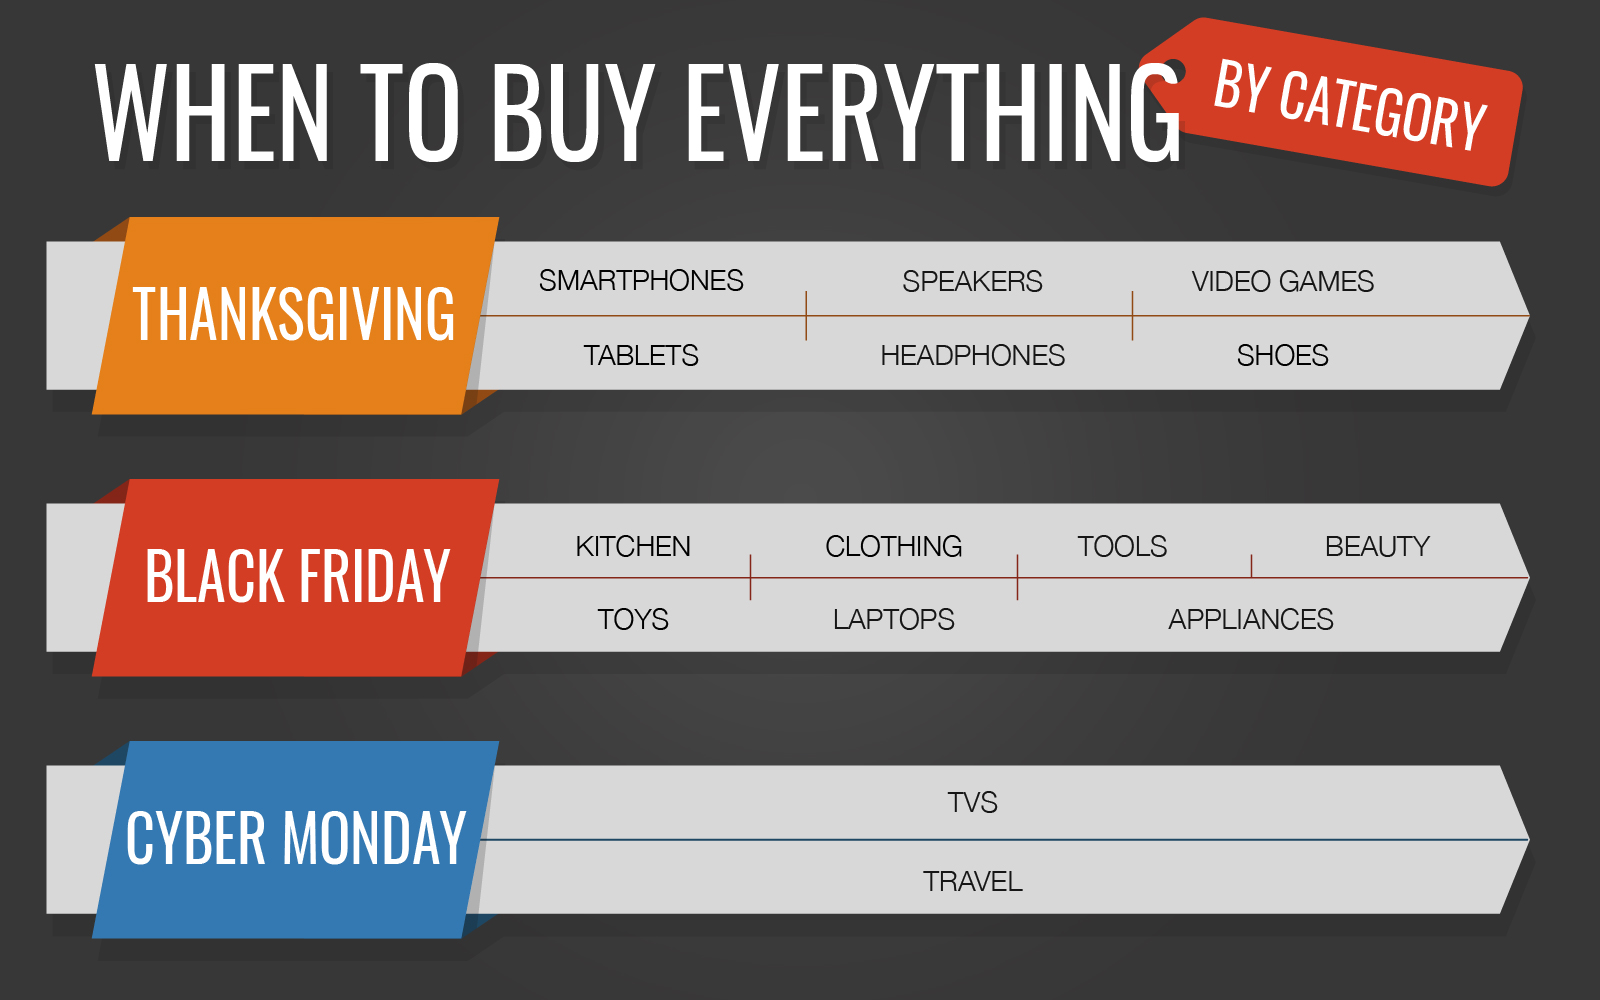 Thanksgiving vs. Black Friday vs. Cyber Monday: What to Buy Each Day